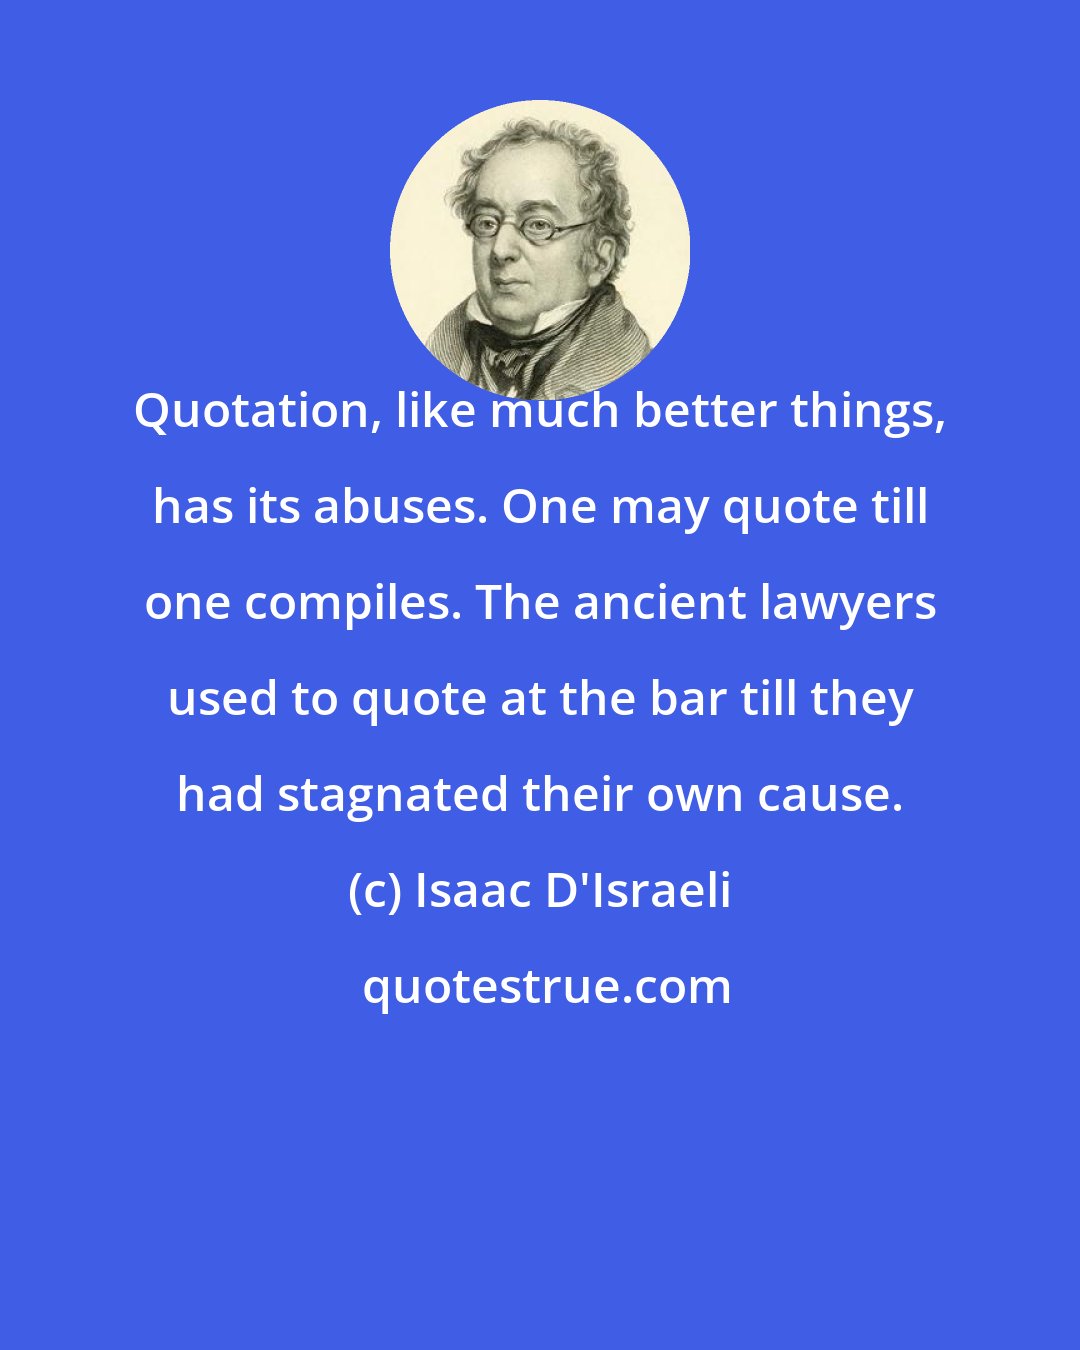 Isaac D'Israeli: Quotation, like much better things, has its abuses. One may quote till one compiles. The ancient lawyers used to quote at the bar till they had stagnated their own cause.